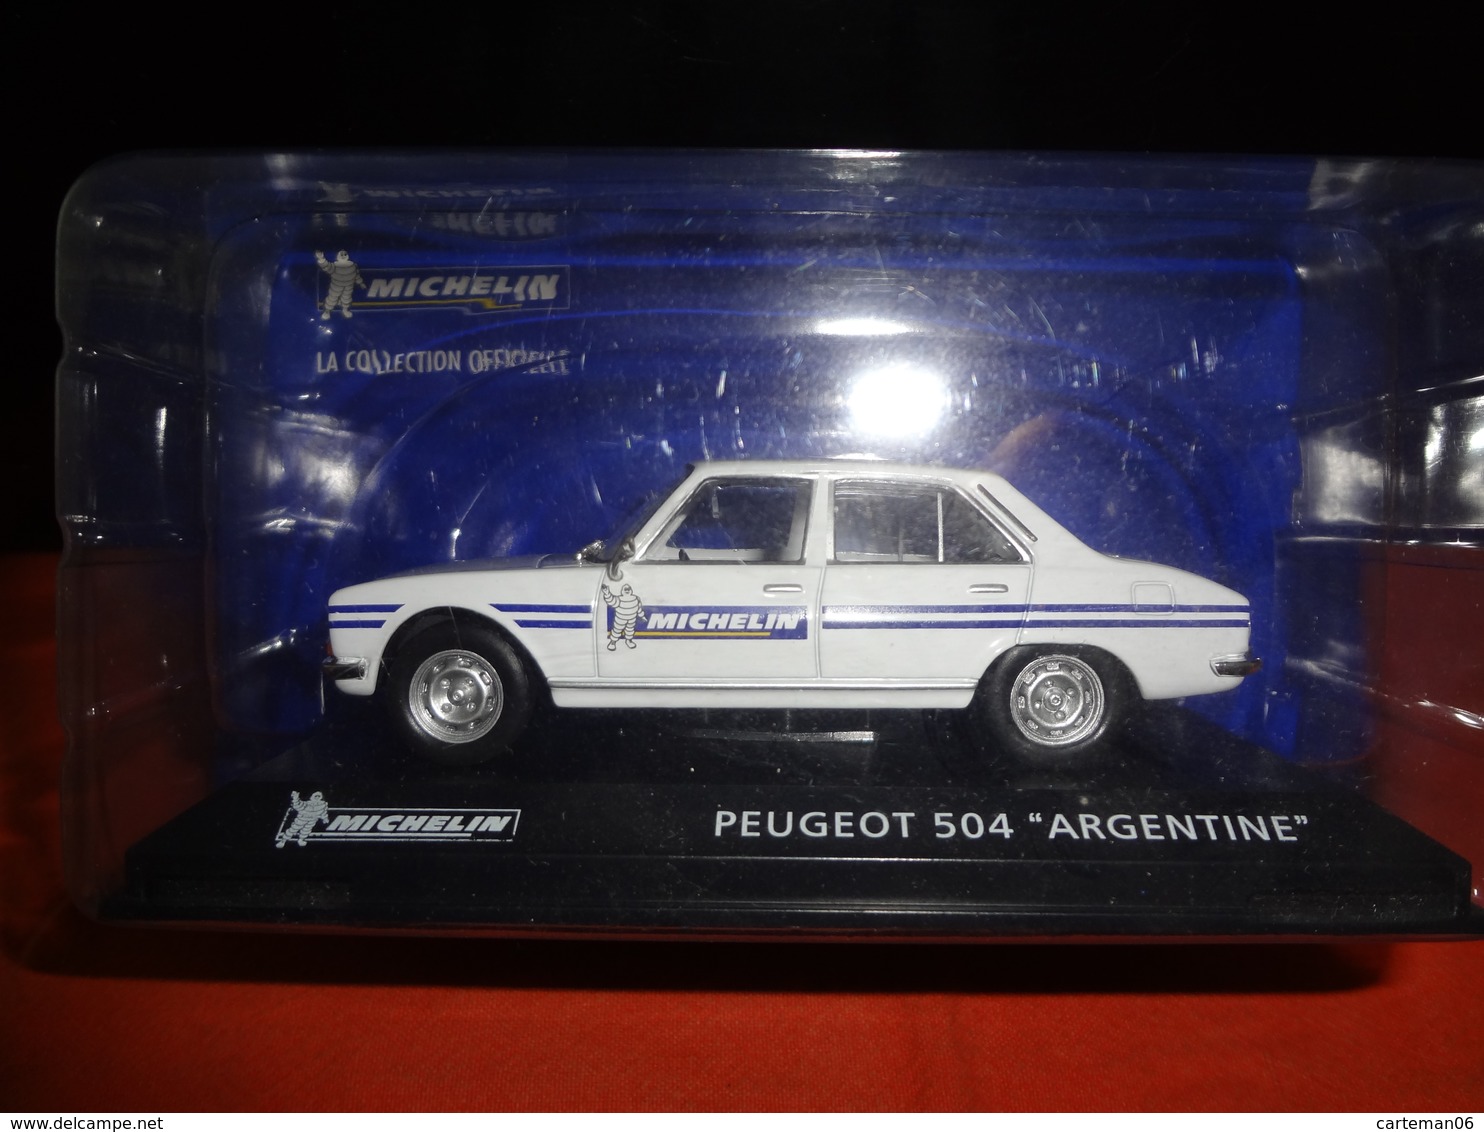 Voiture - Peugeot 504 "Argentine Michelin" - 1/43 - Advertising - All Brands